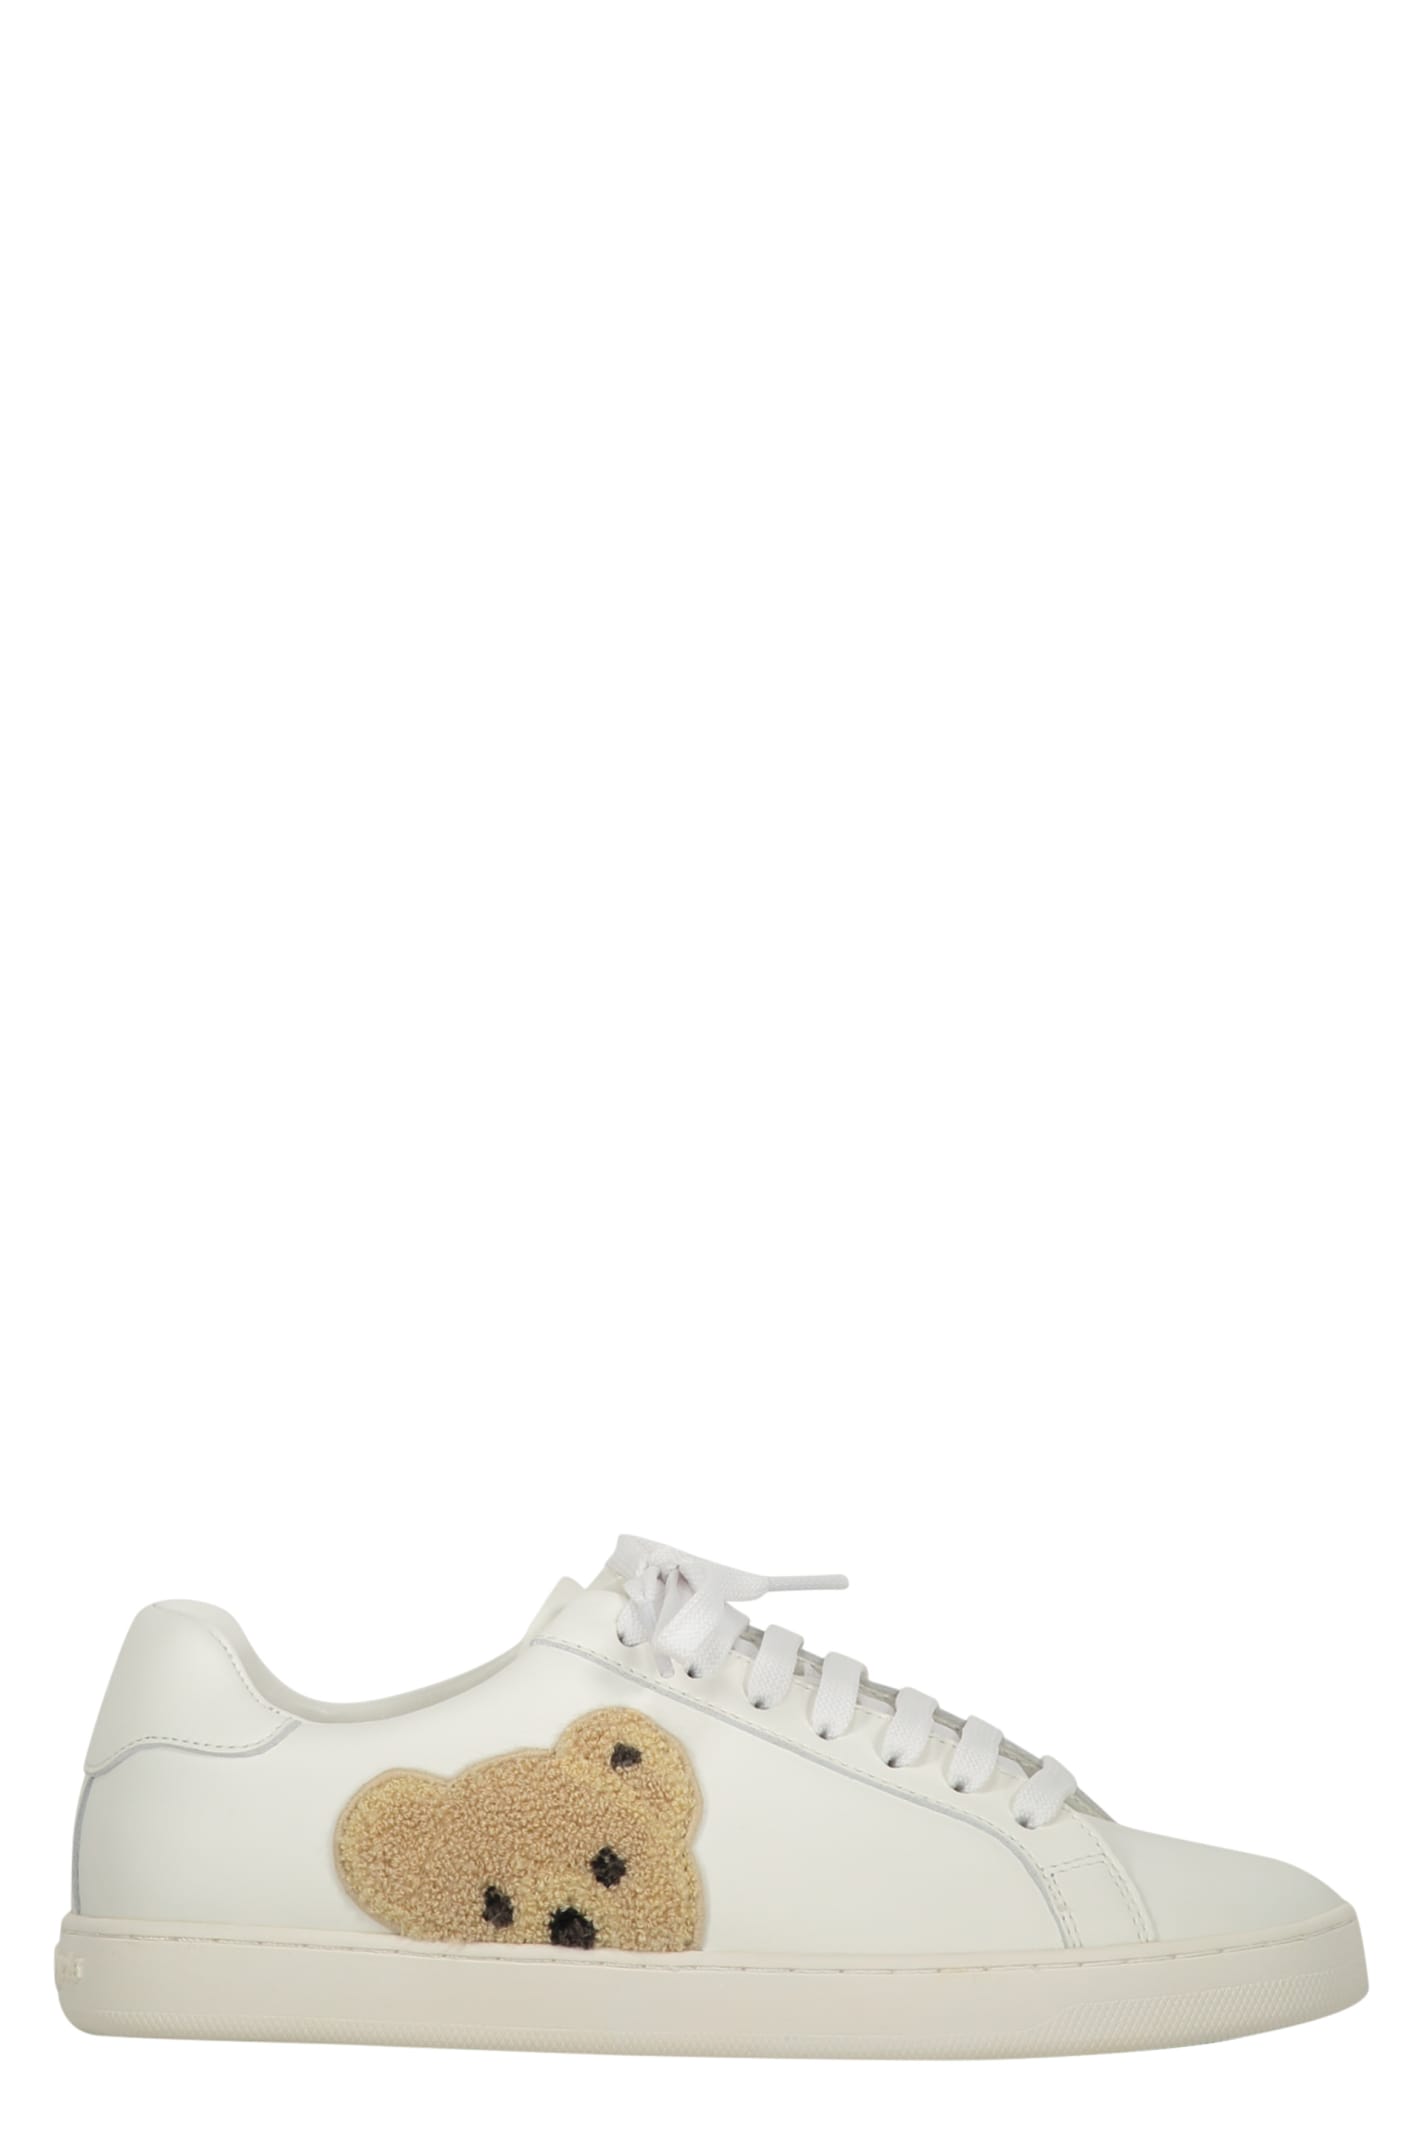 Palm Angels New Teddy Bear Leather Low-top Sneakers